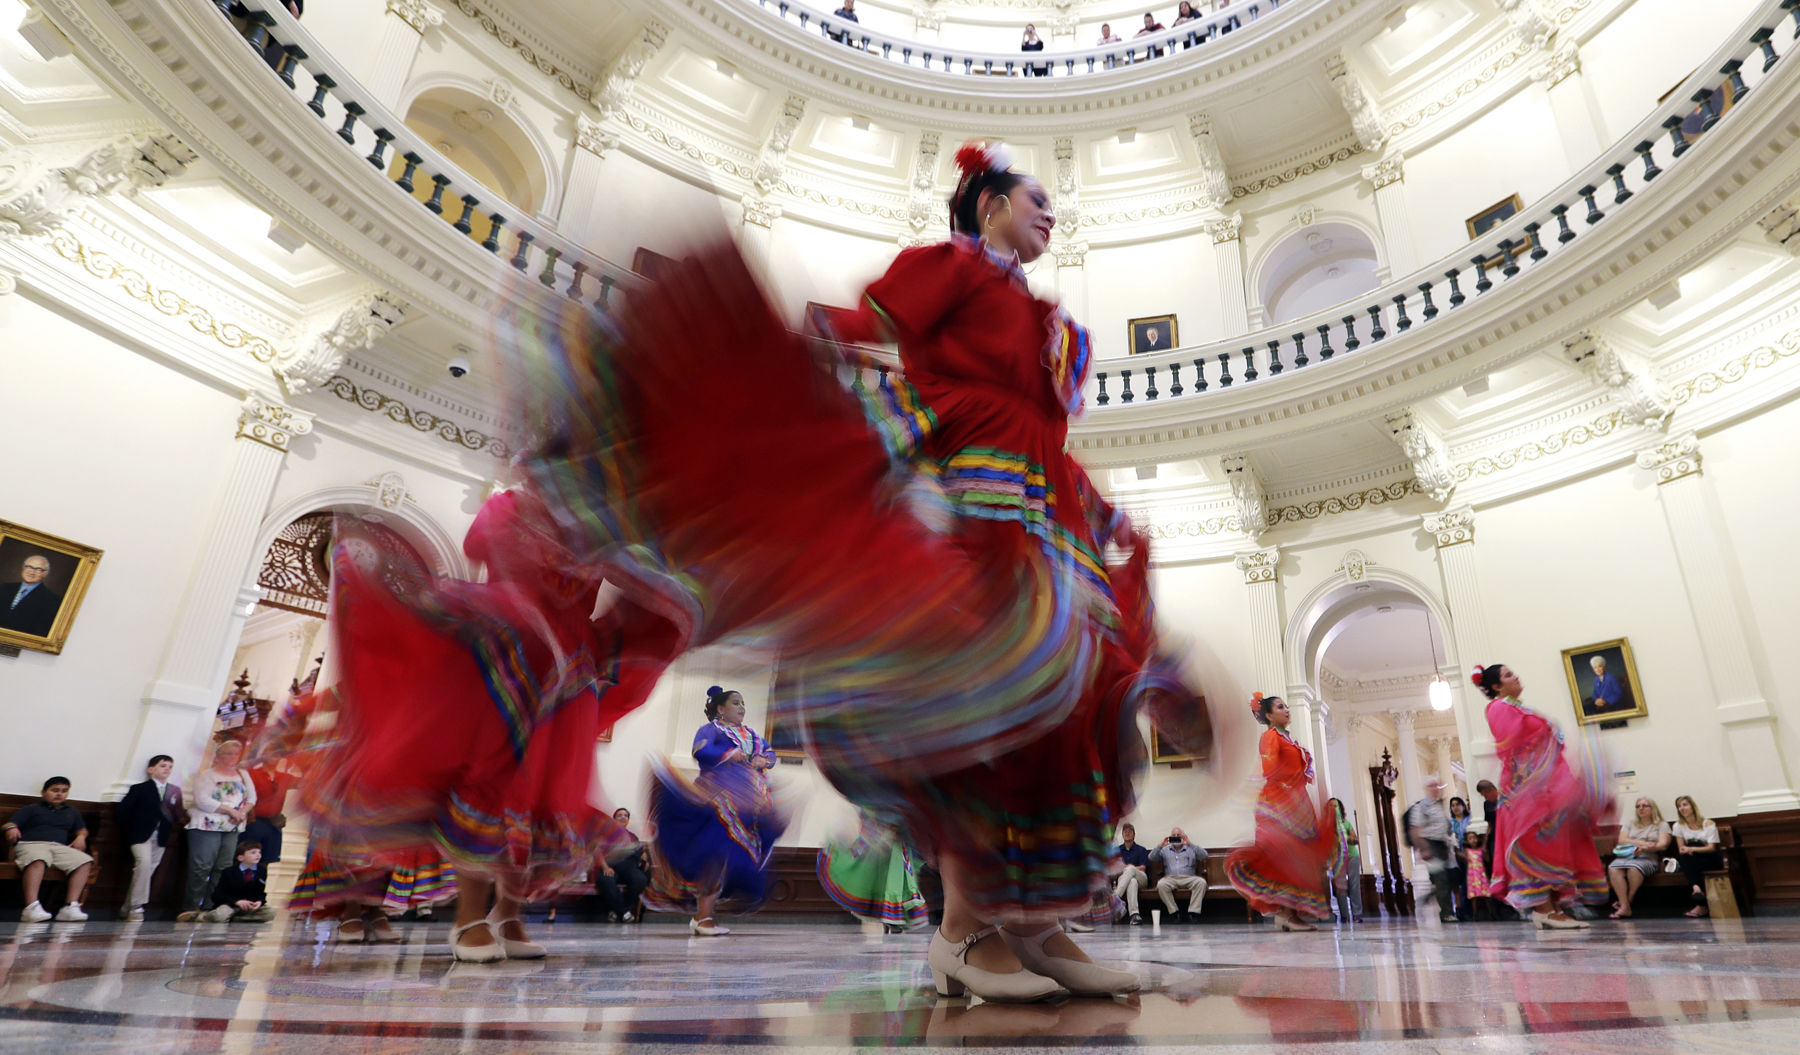 Ballet Folklorico dancers from Rio Grande City perform in the Rotunda of the Texas State Capitol, Wednesday, April 19, 2017, in Austin, Texas. (AP Photo/Eric Gay)